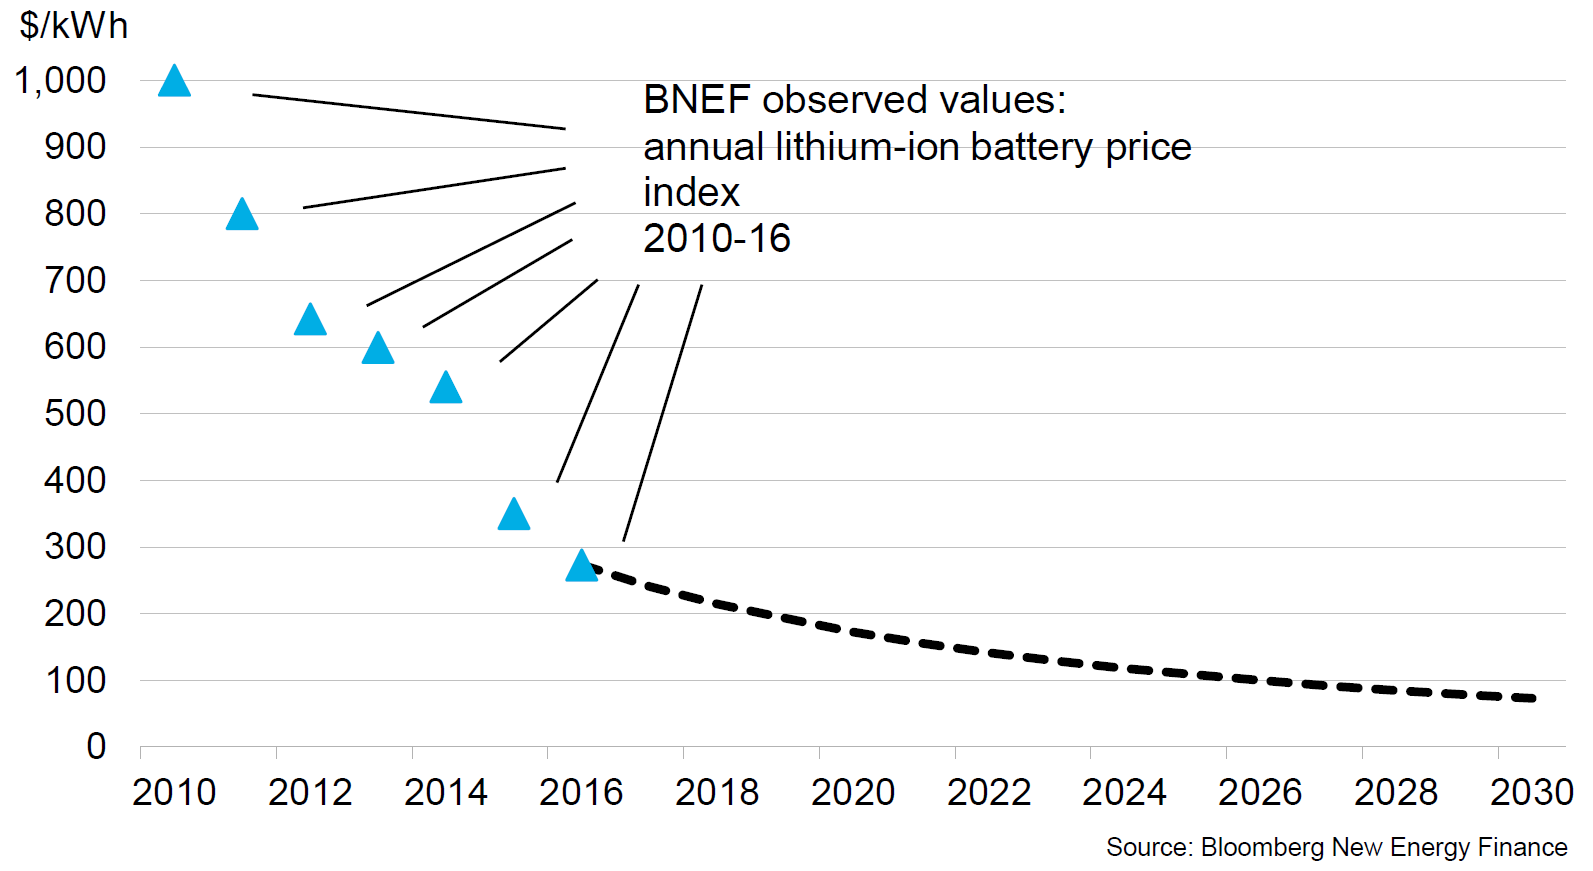 Lithium-ion battery prices have fallen rapidly over the past decade and are expected to continue their downward trend. Source: Bloomberg New Energy Finance